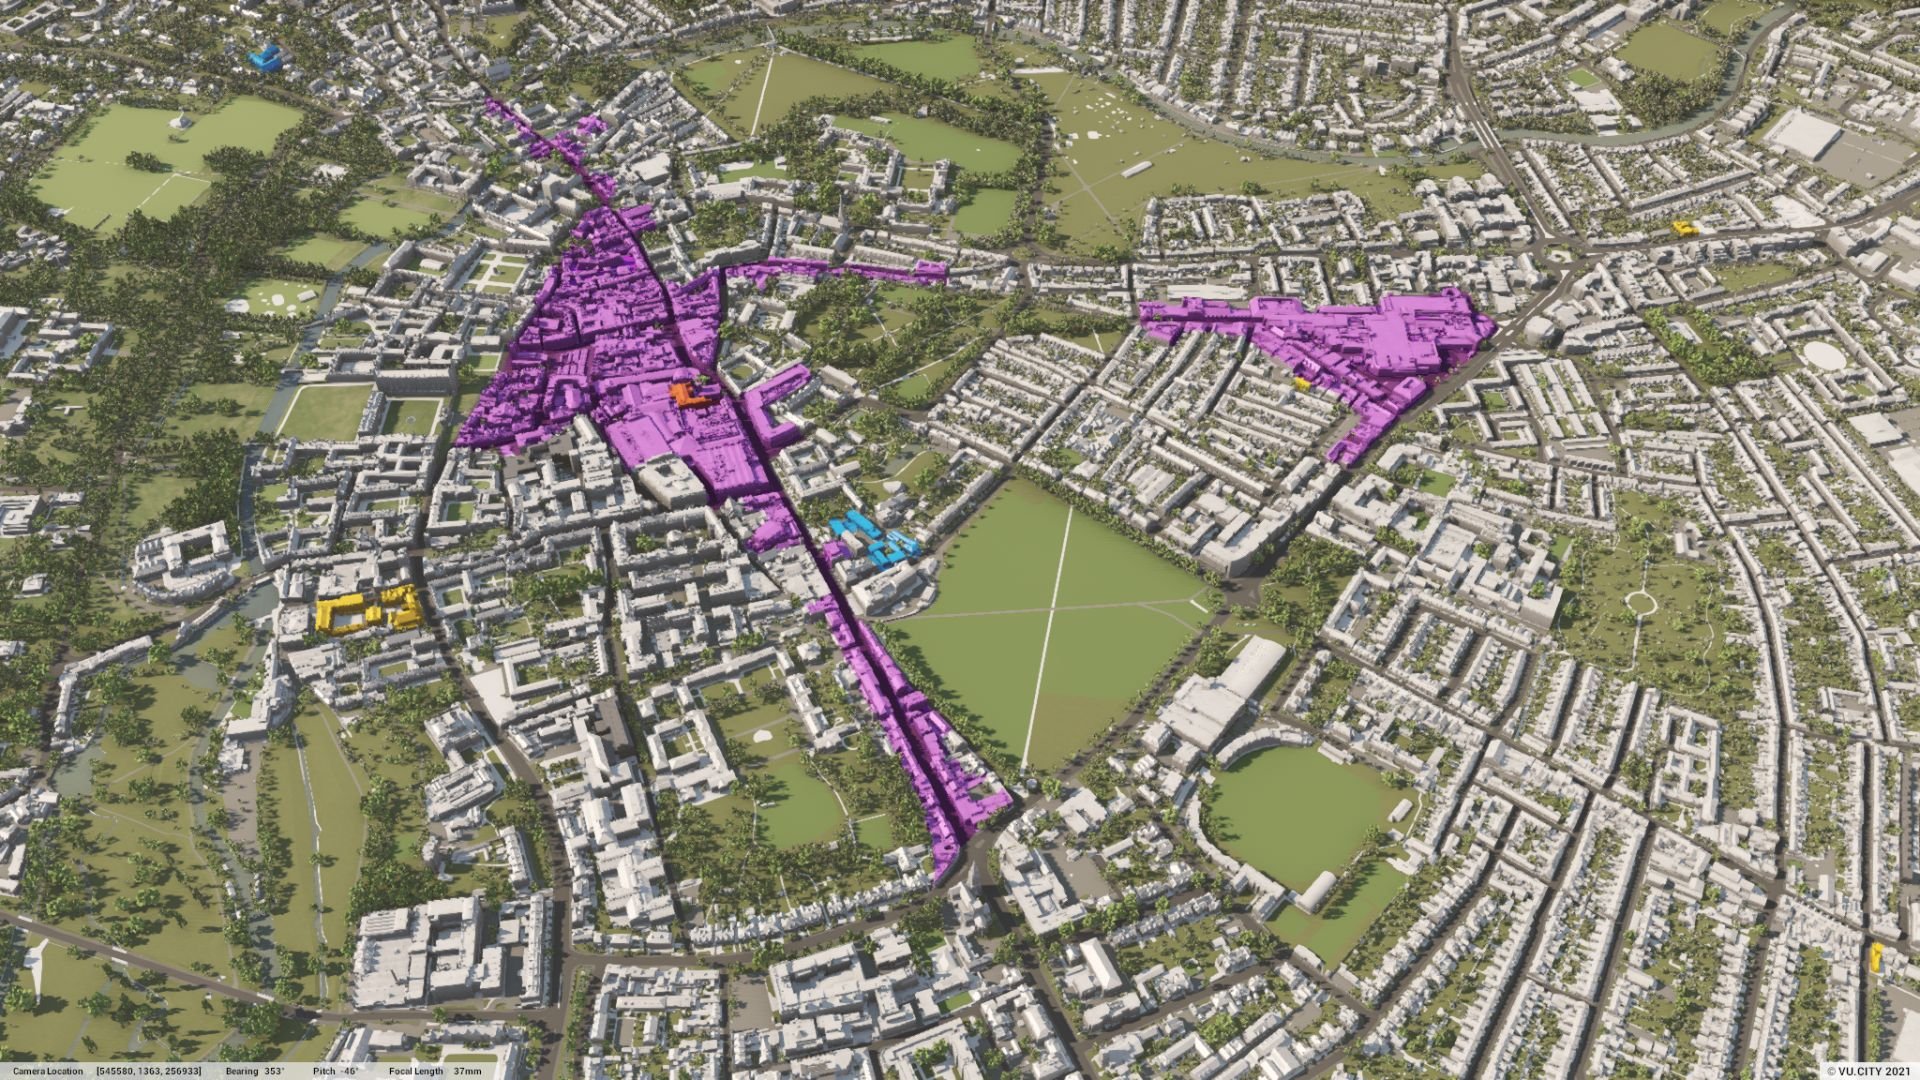 Primary Shopping Area Data from Cambridge City Council